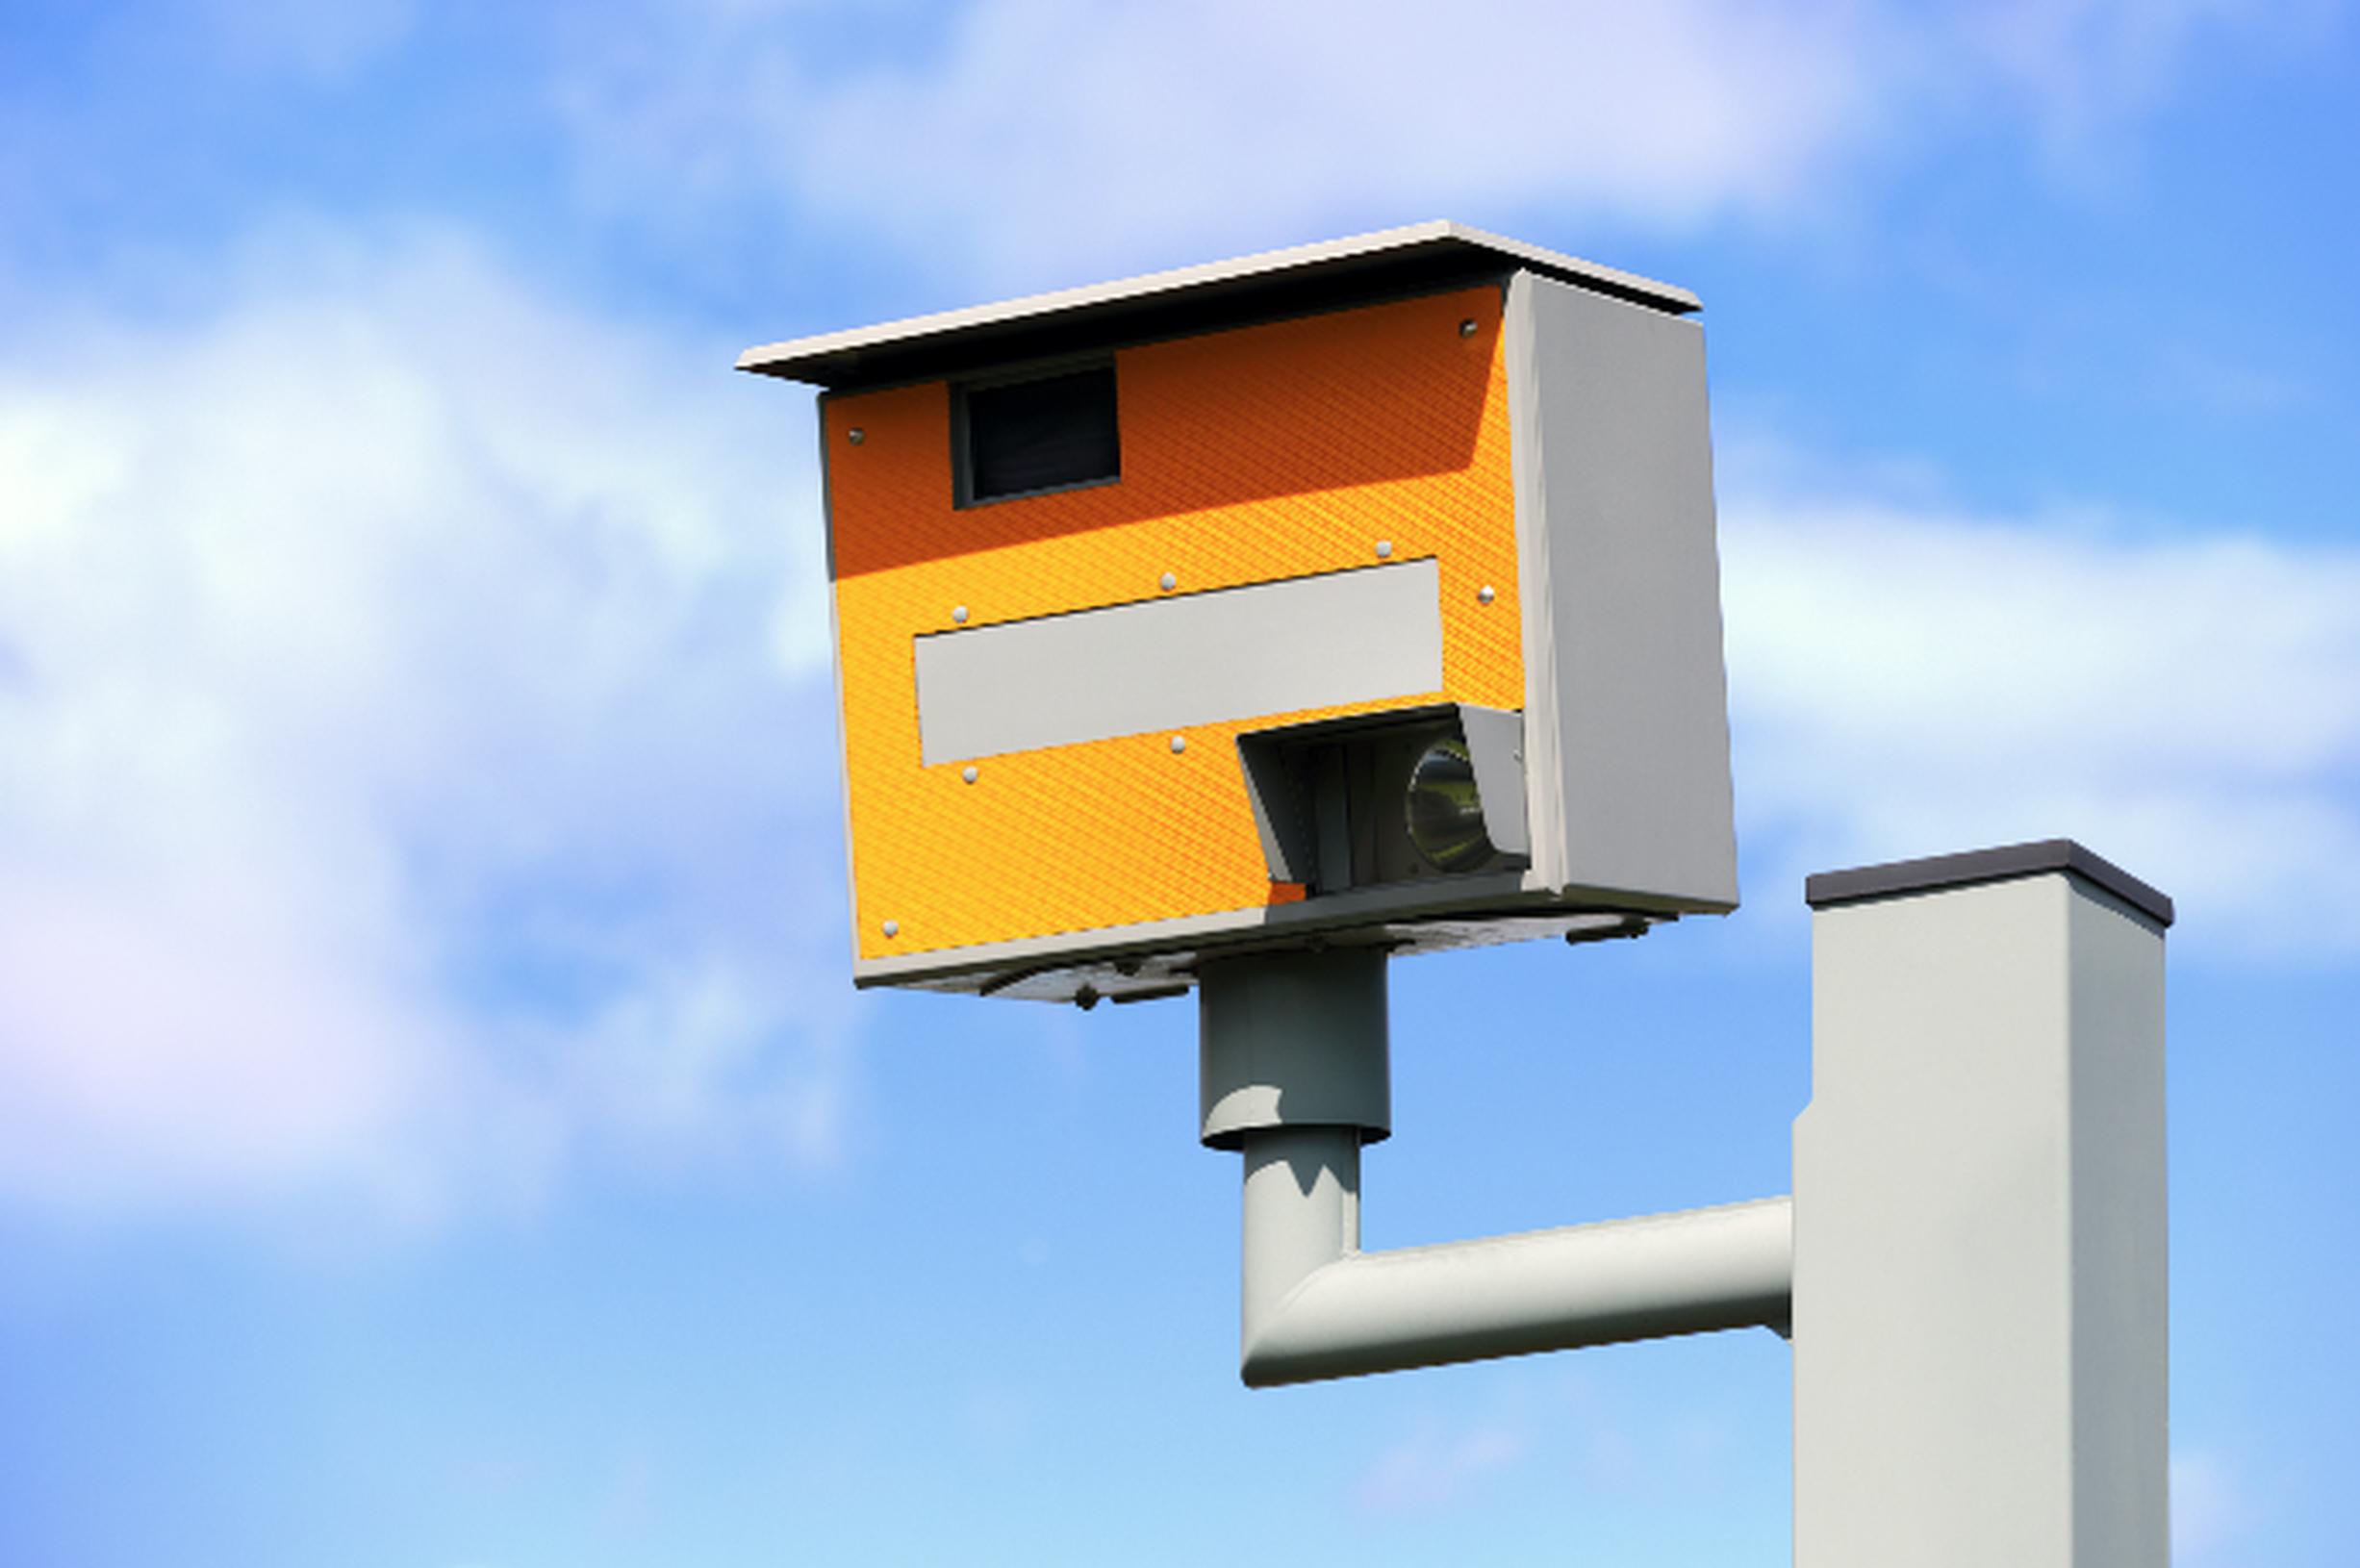 82% of the British driving public support using speed cameras to automatically fine drivers travelling more than 10mph over the limit near schools